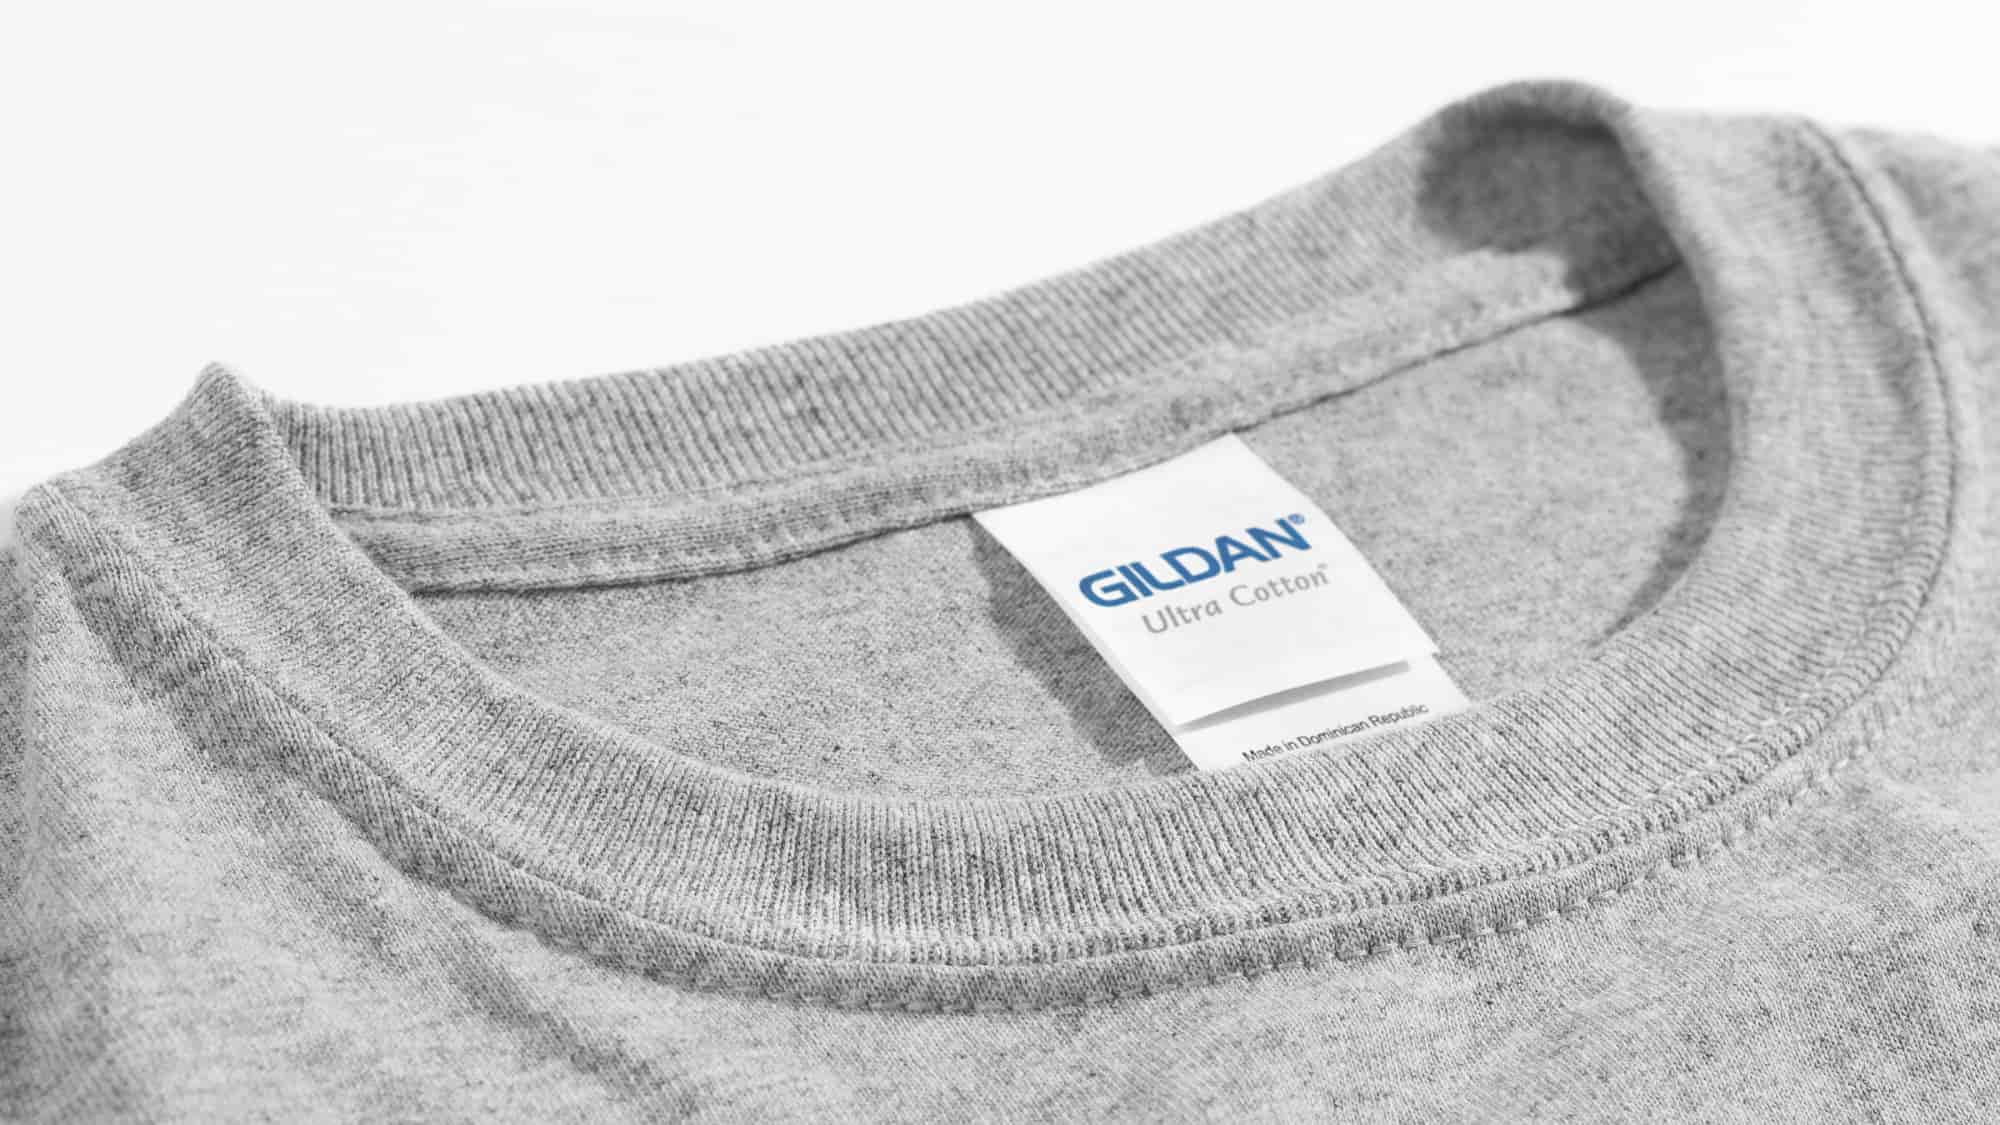 A detail image of the collar of the Gildan Ultra Cotton Tee.